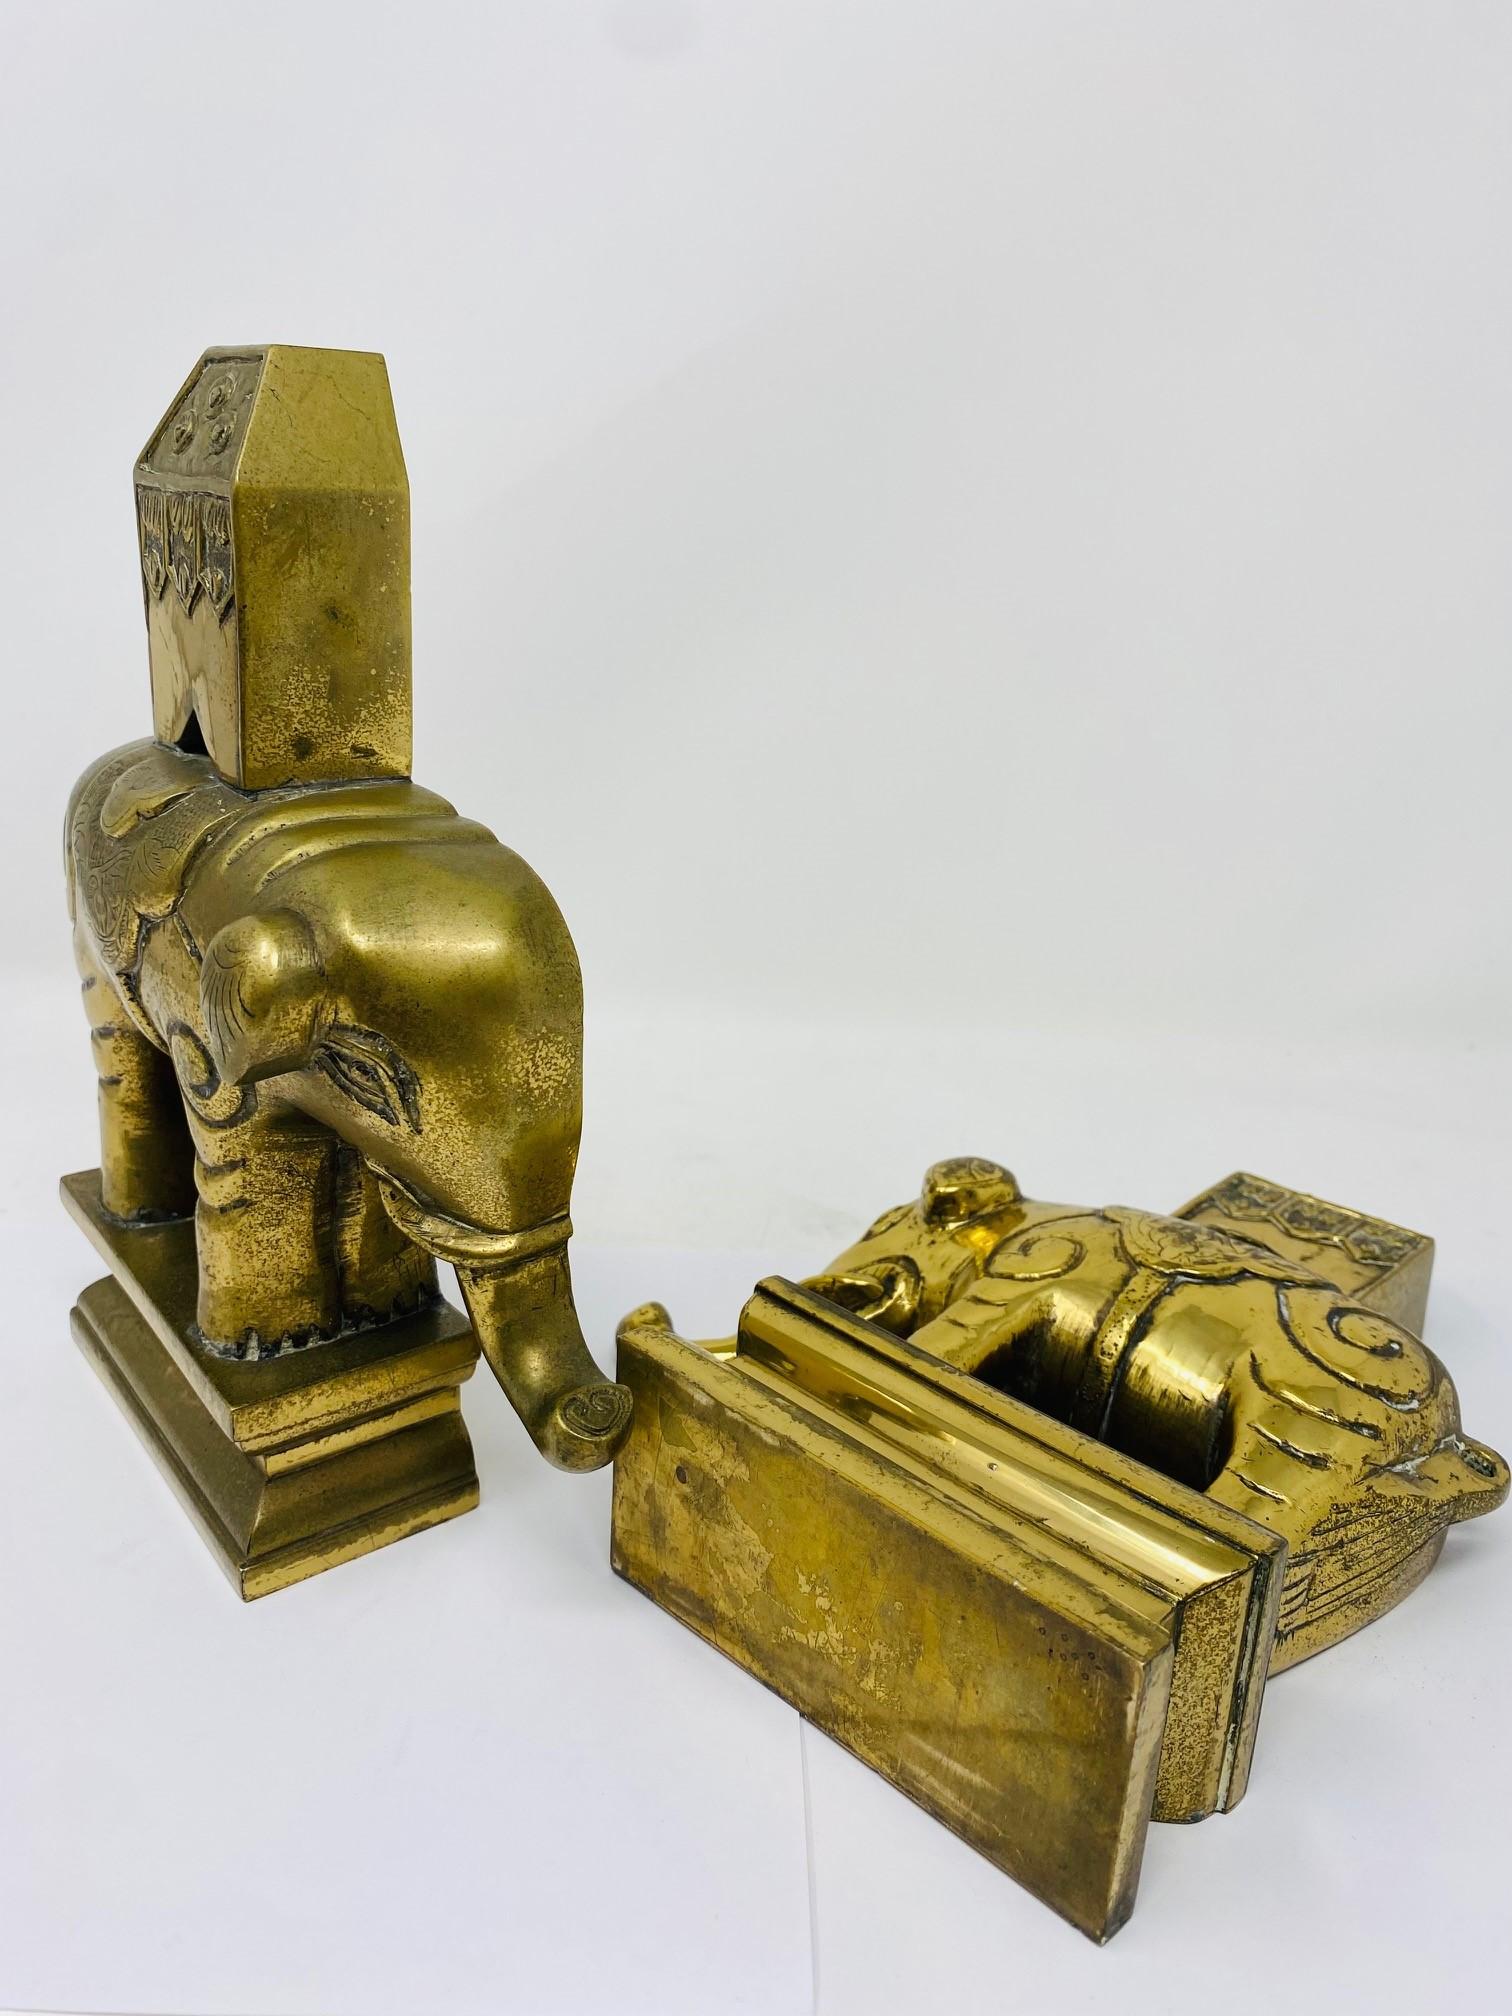 Vintage 1940s Pair of Sculptural Elephant Bookends in Solid Brass For Sale 3